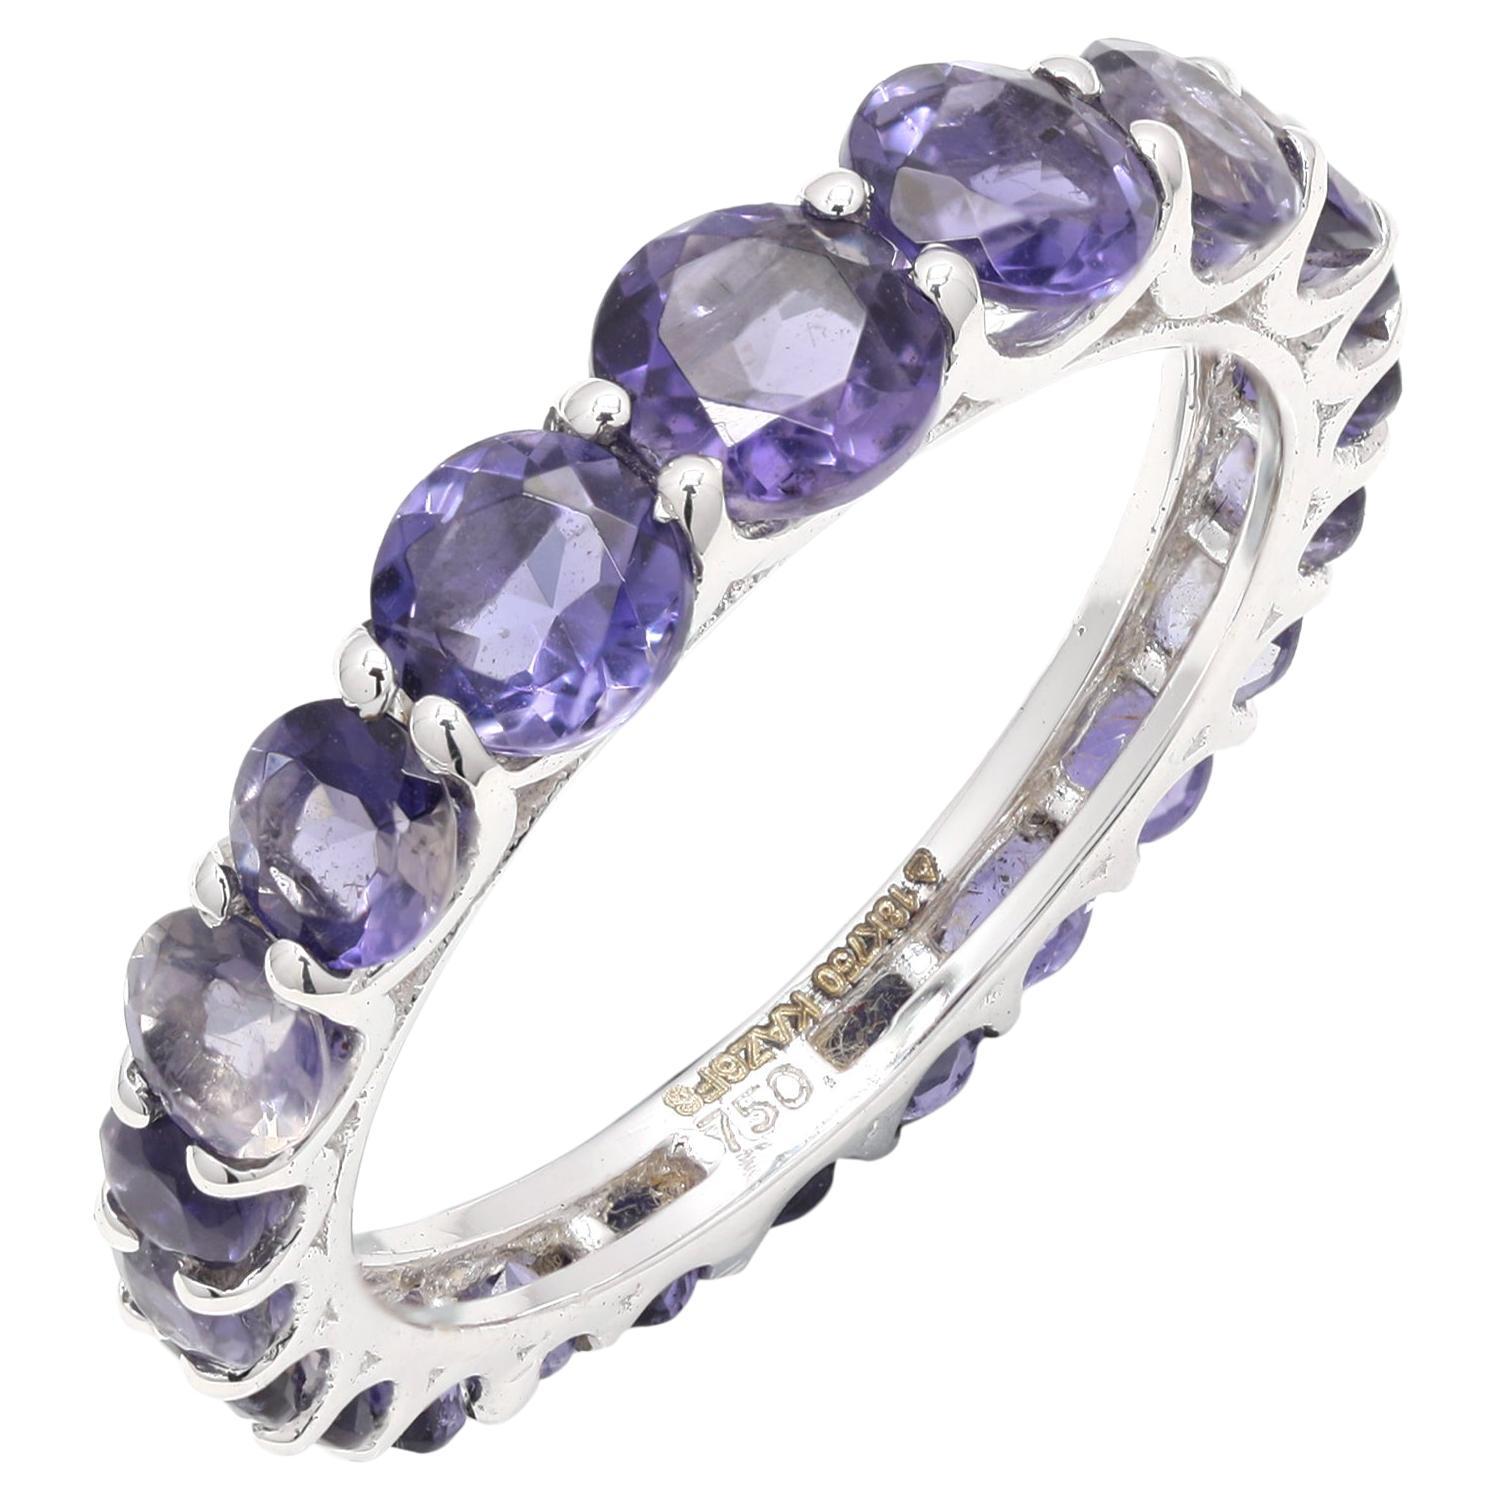 Stackable Eternity 2.27ct Iolite Gemstone Band Ring in 18k White Gold Settings